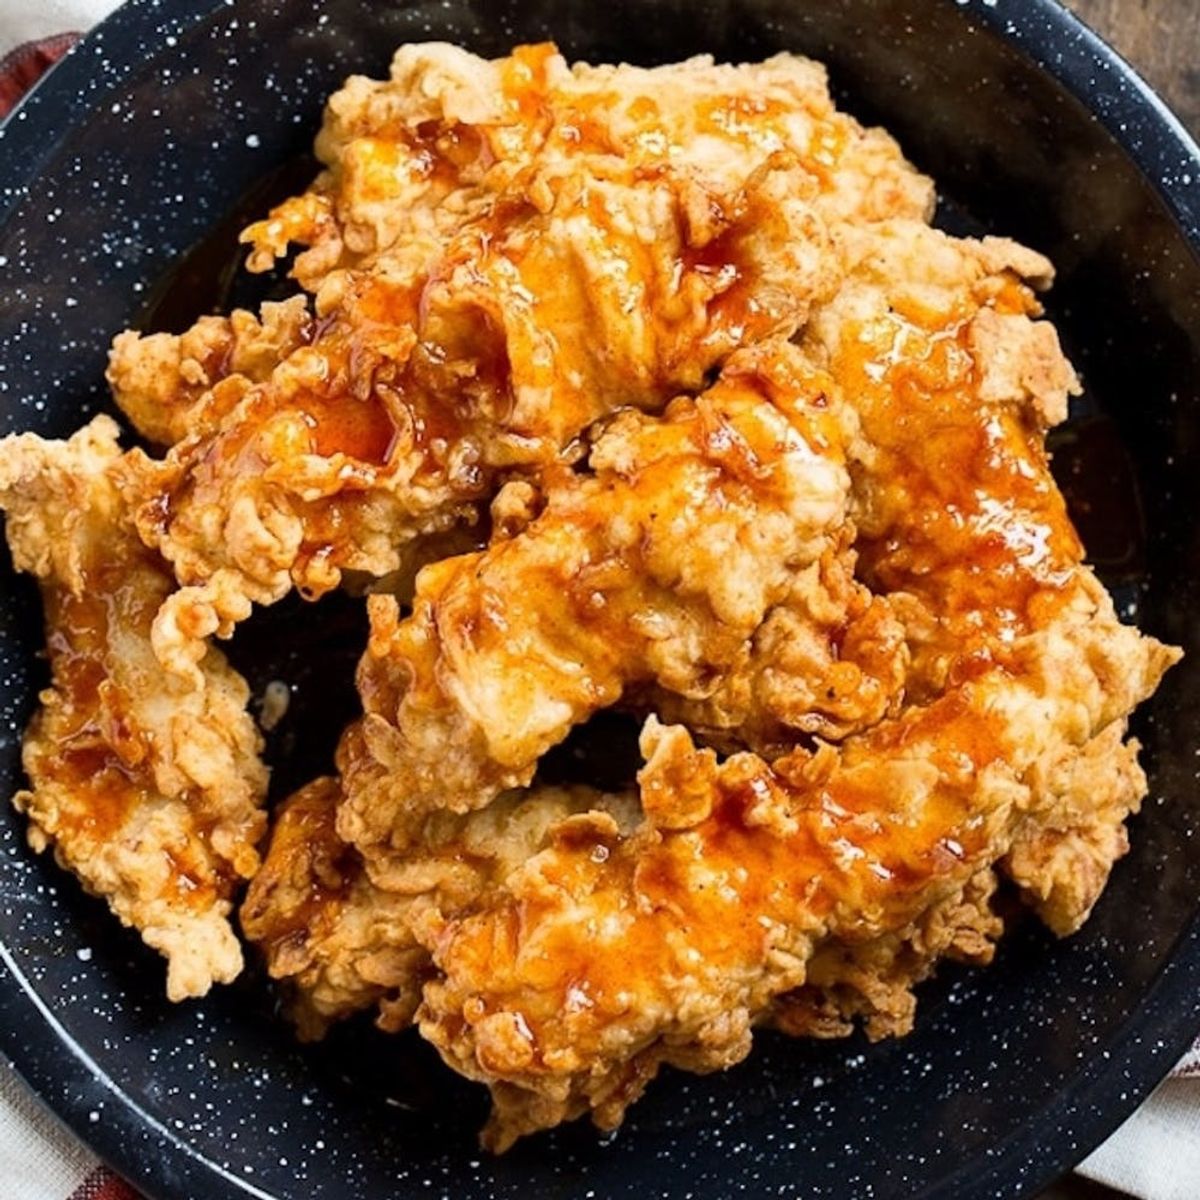 Try These Grown-Up Versions of Chicken Tenders Everyone Will Enjoy